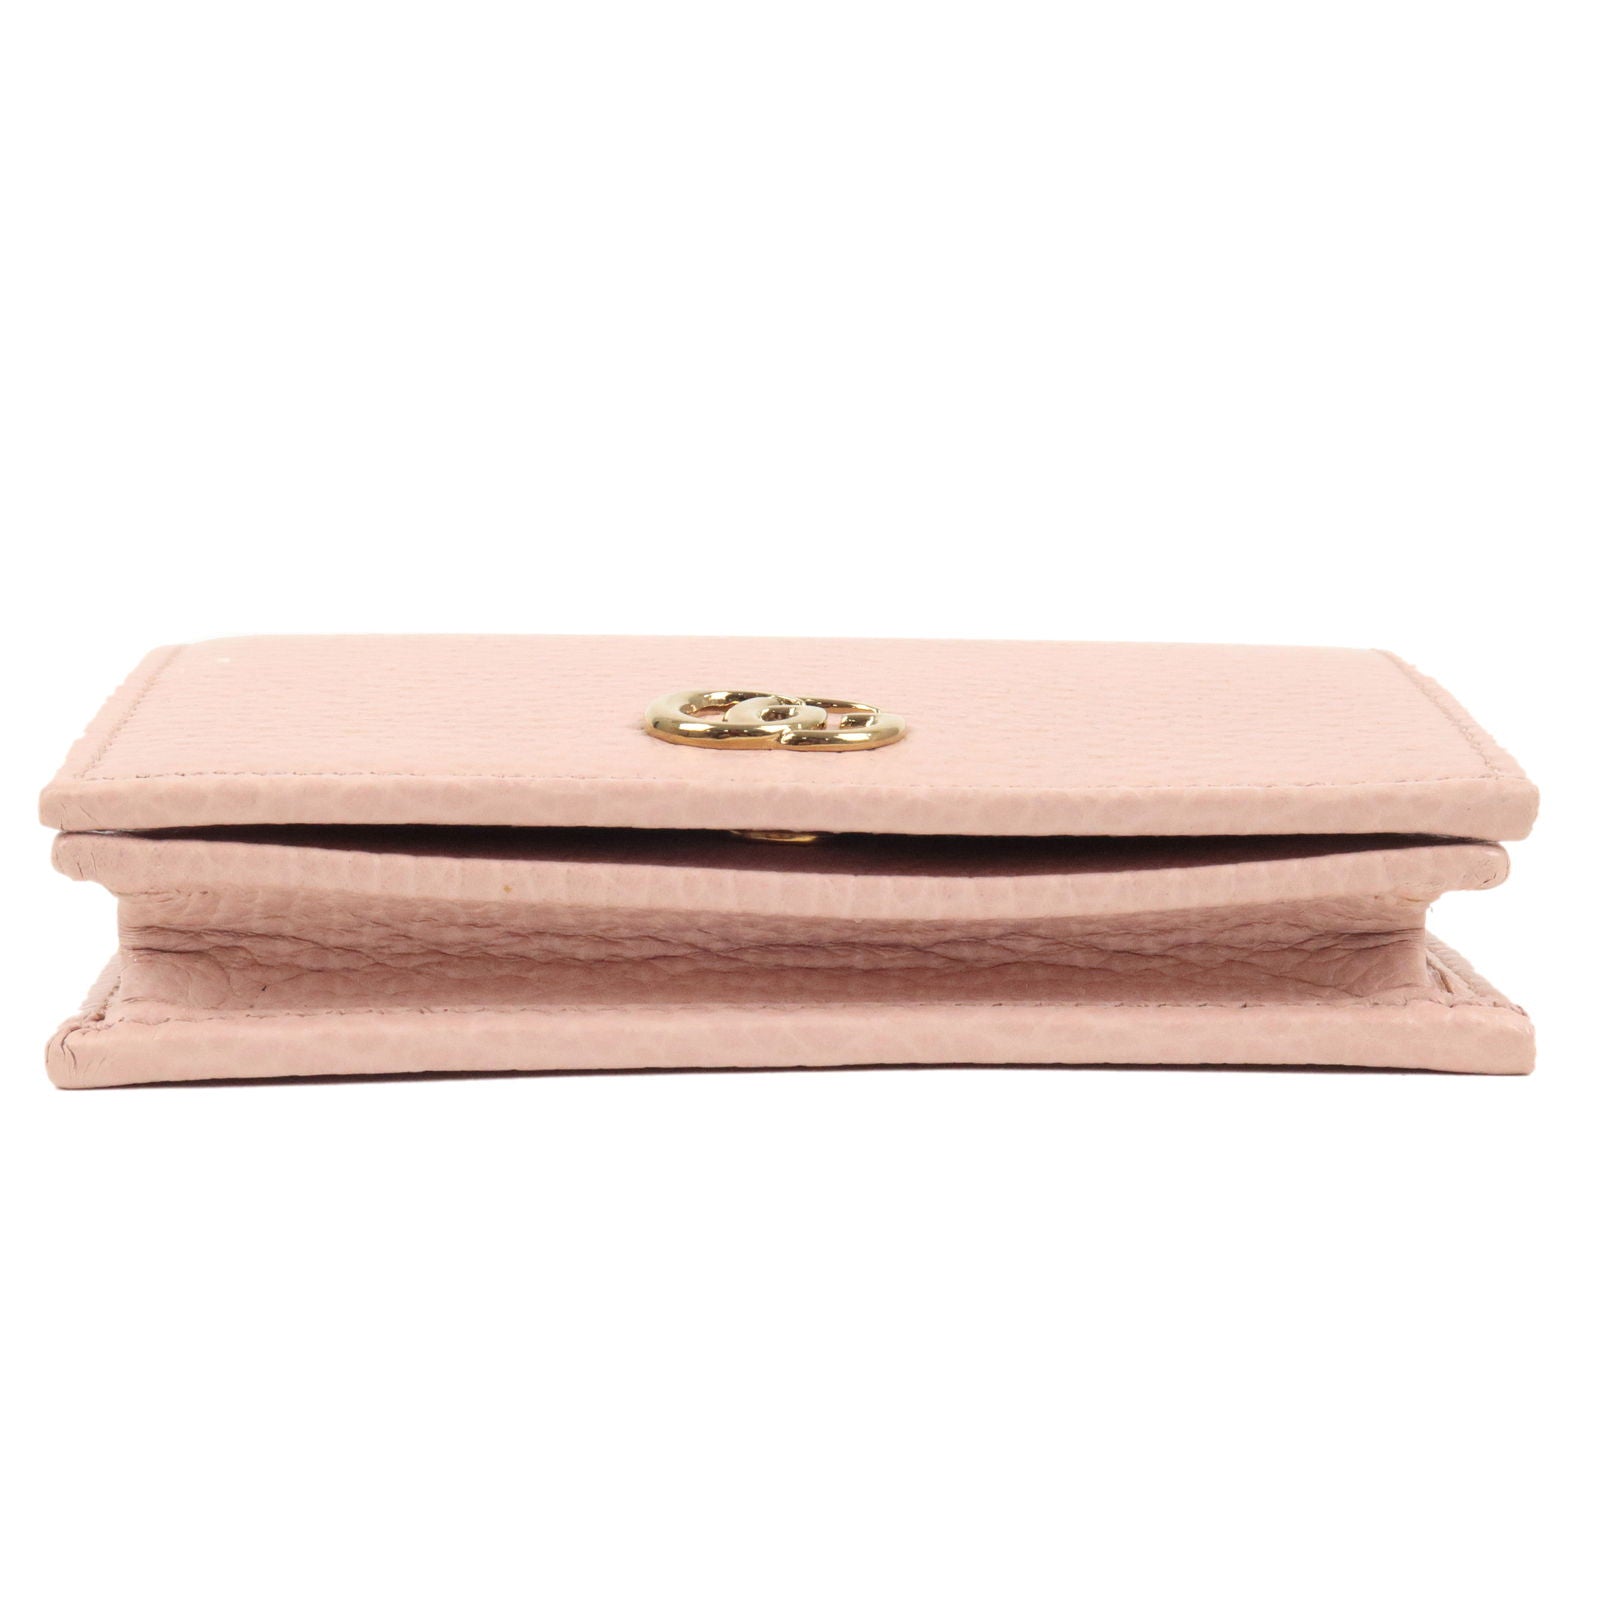 BURBERRY Trench Leather Continental Wallet Blossom Pink